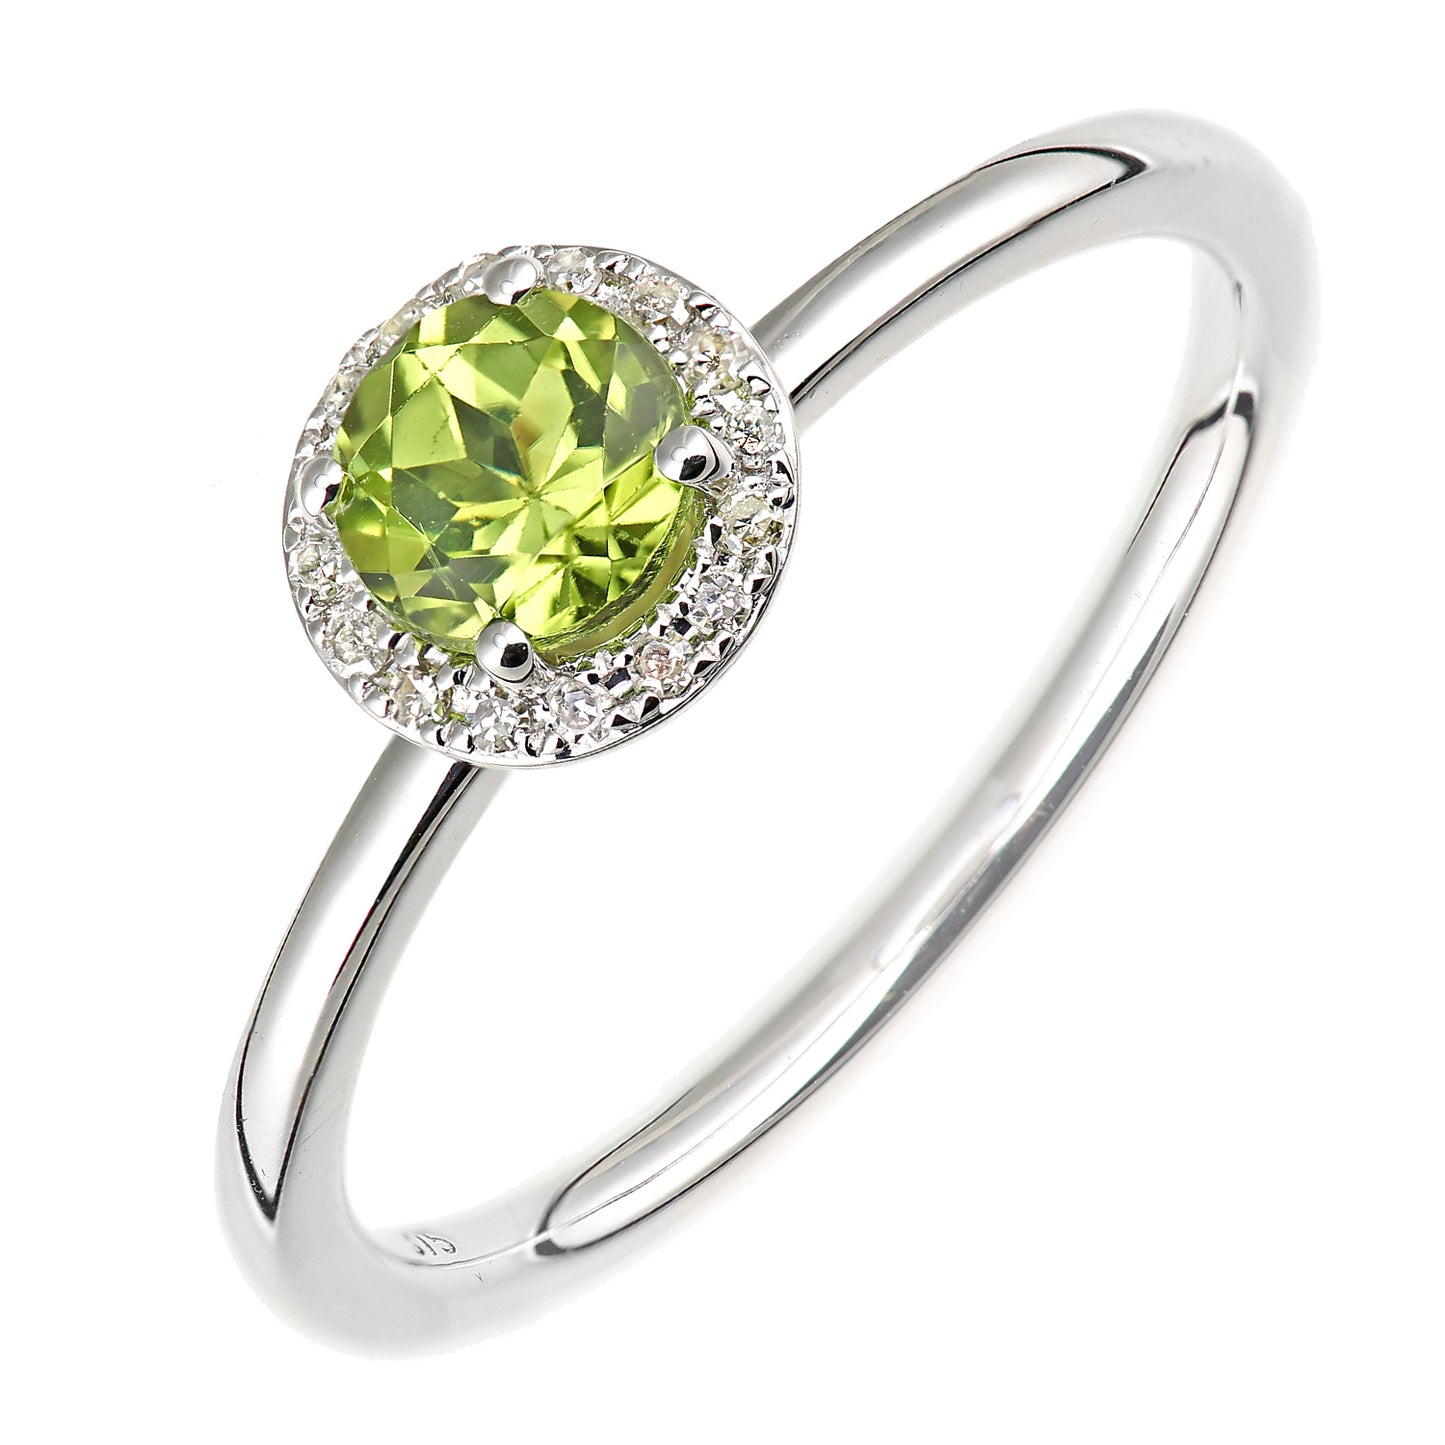 9ct White Gold  5pts Diamond 0.59ct Peridot Halo Cluster Ring - DR1AXL682WPD